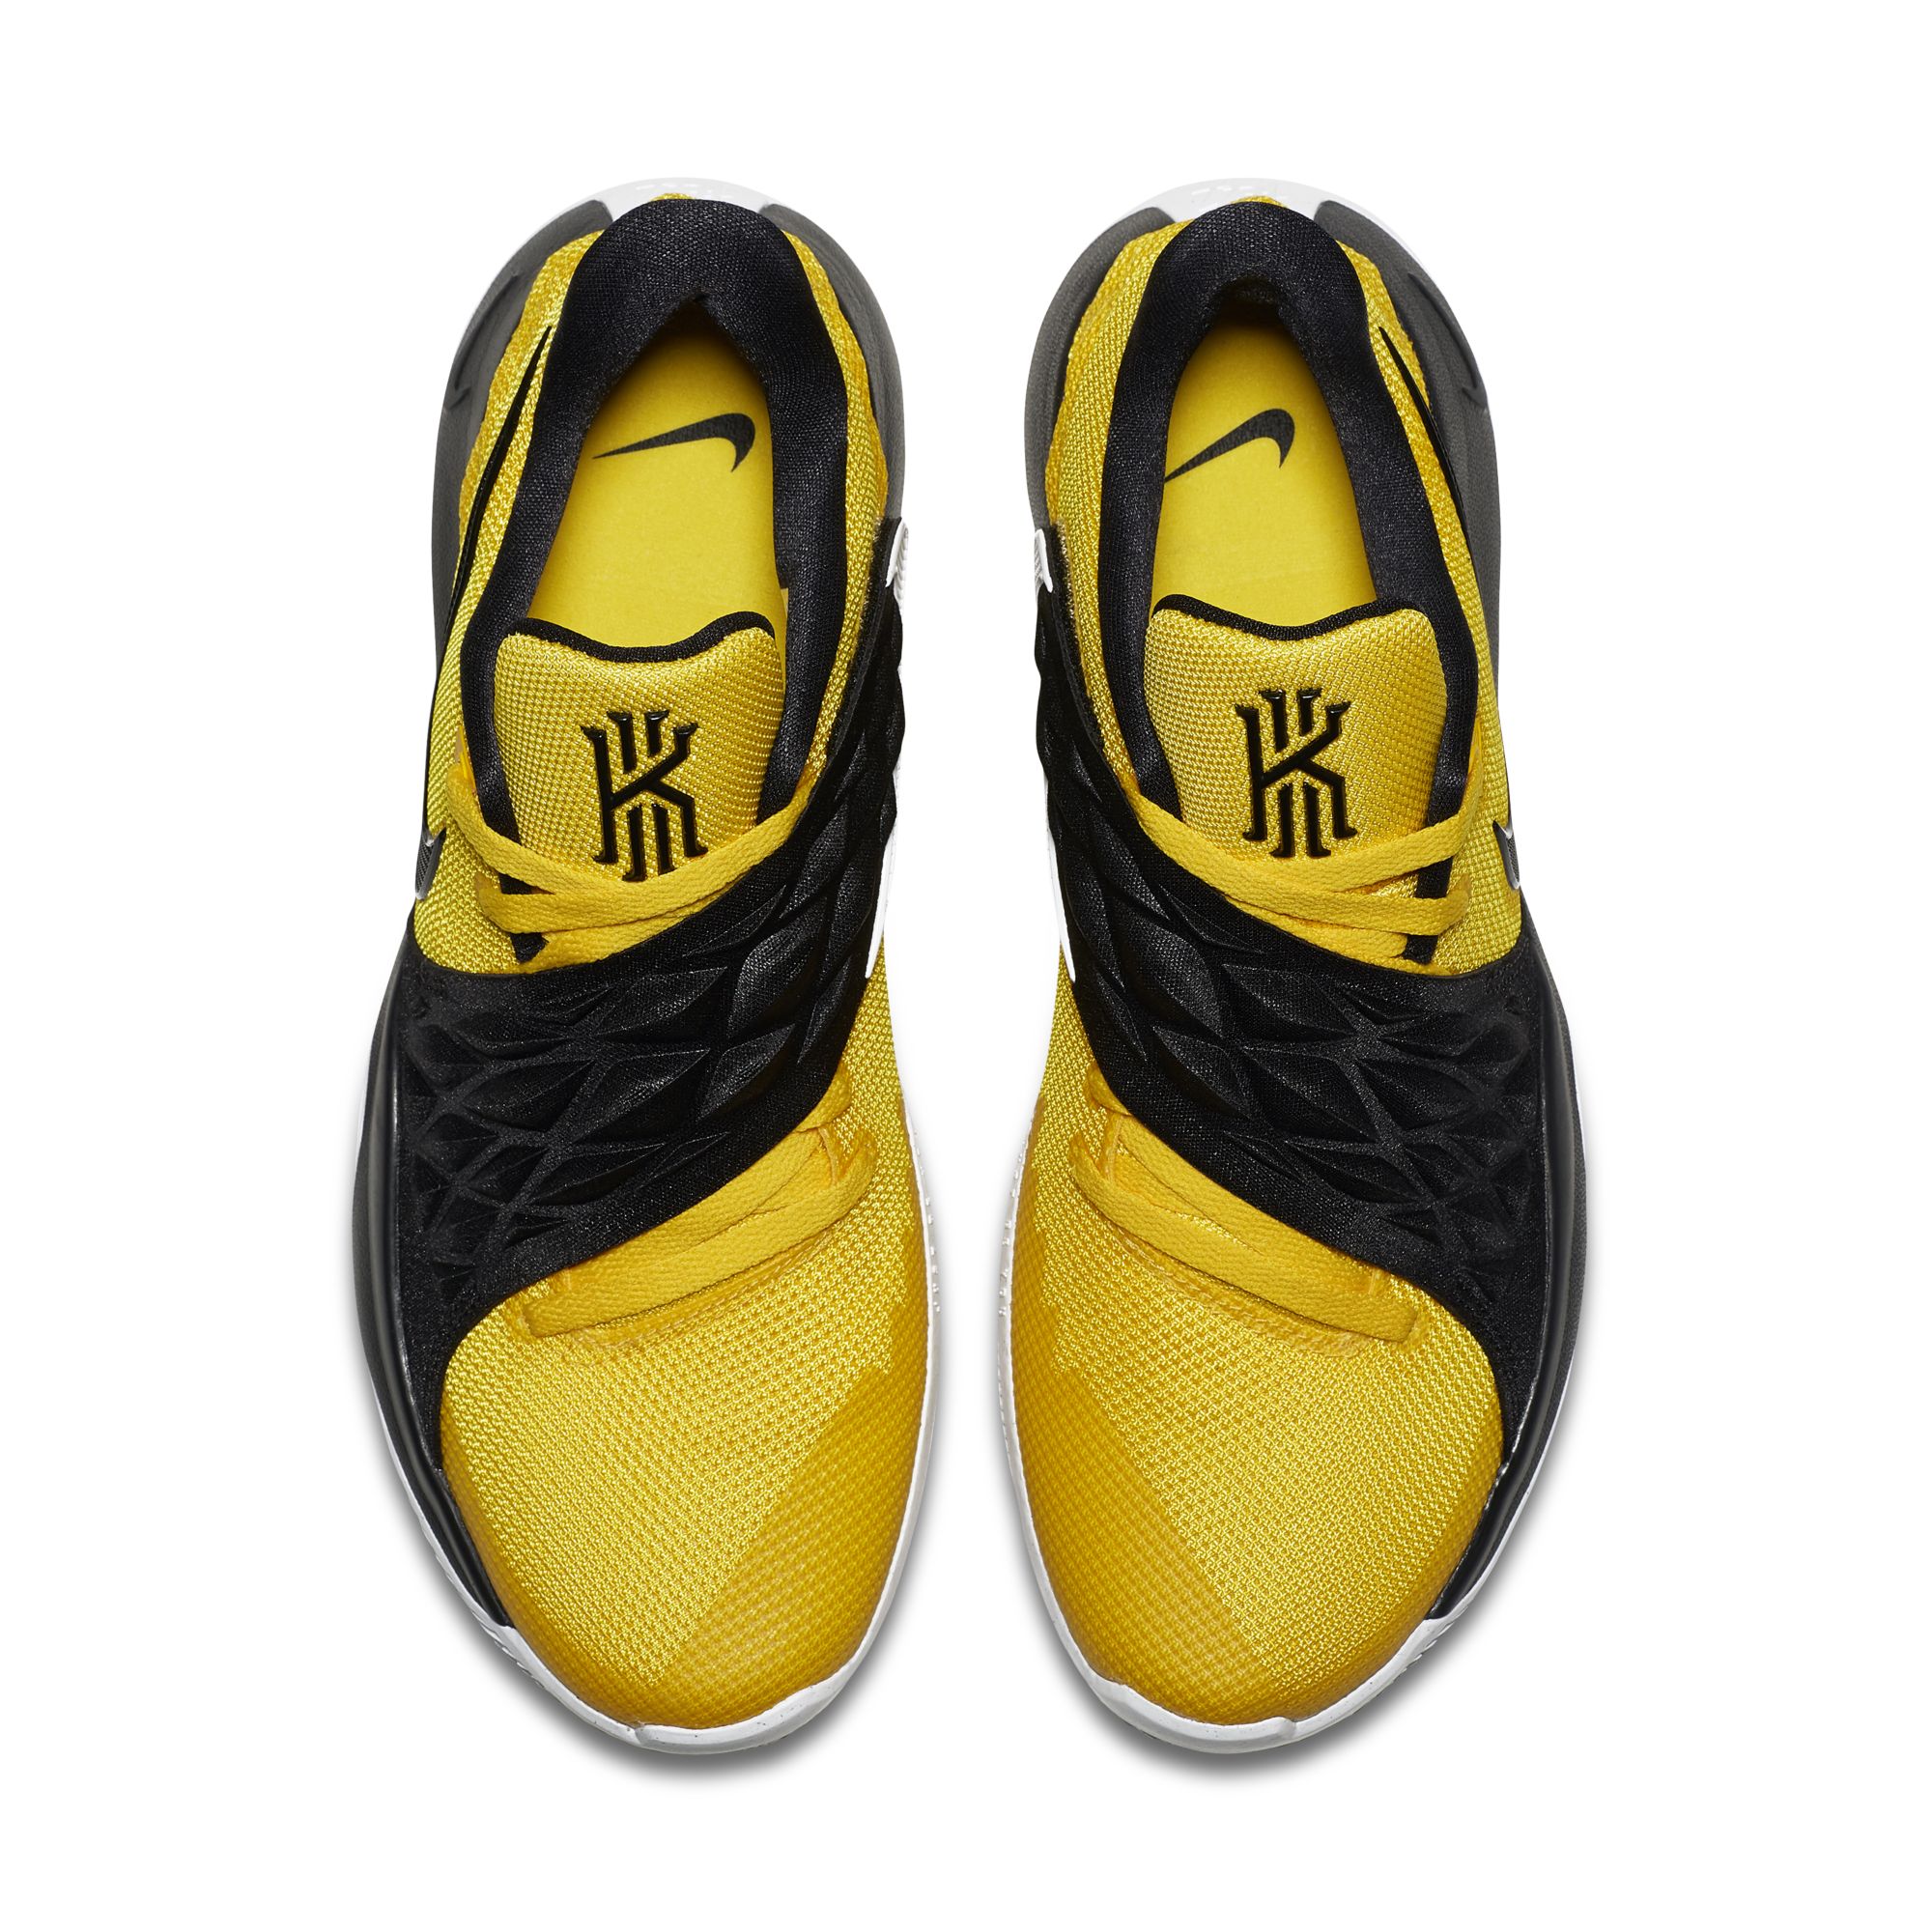 kyrie low yellow